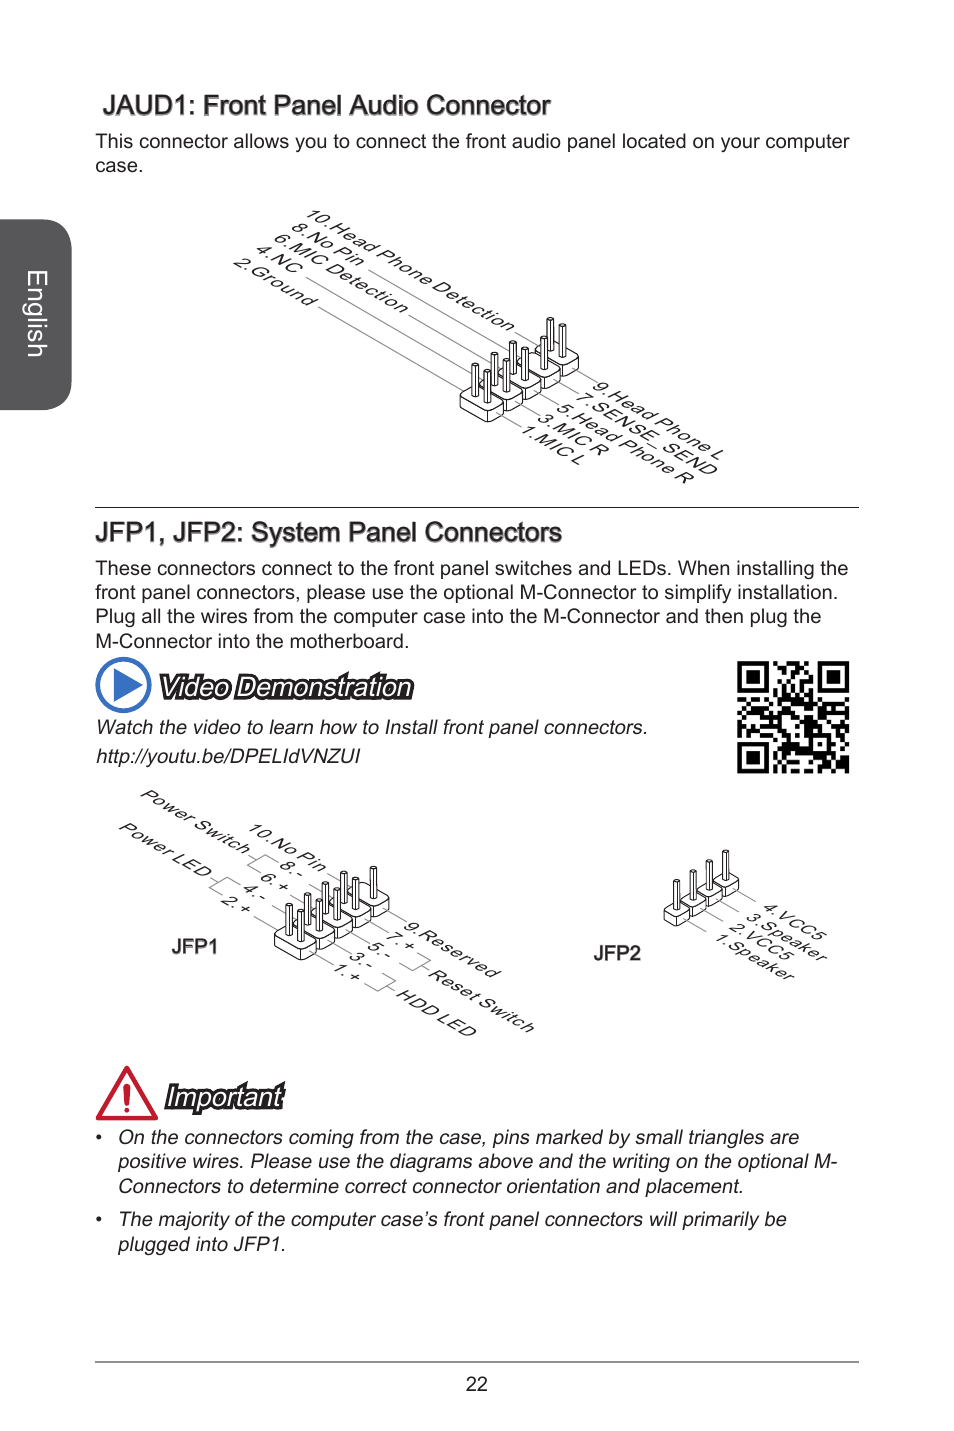 English, Jaud : front panel audio connector, Jfp , jfp2: system panel  connectors | MSI A55M-E35 User Manual | Page 22 / 186 | Original mode